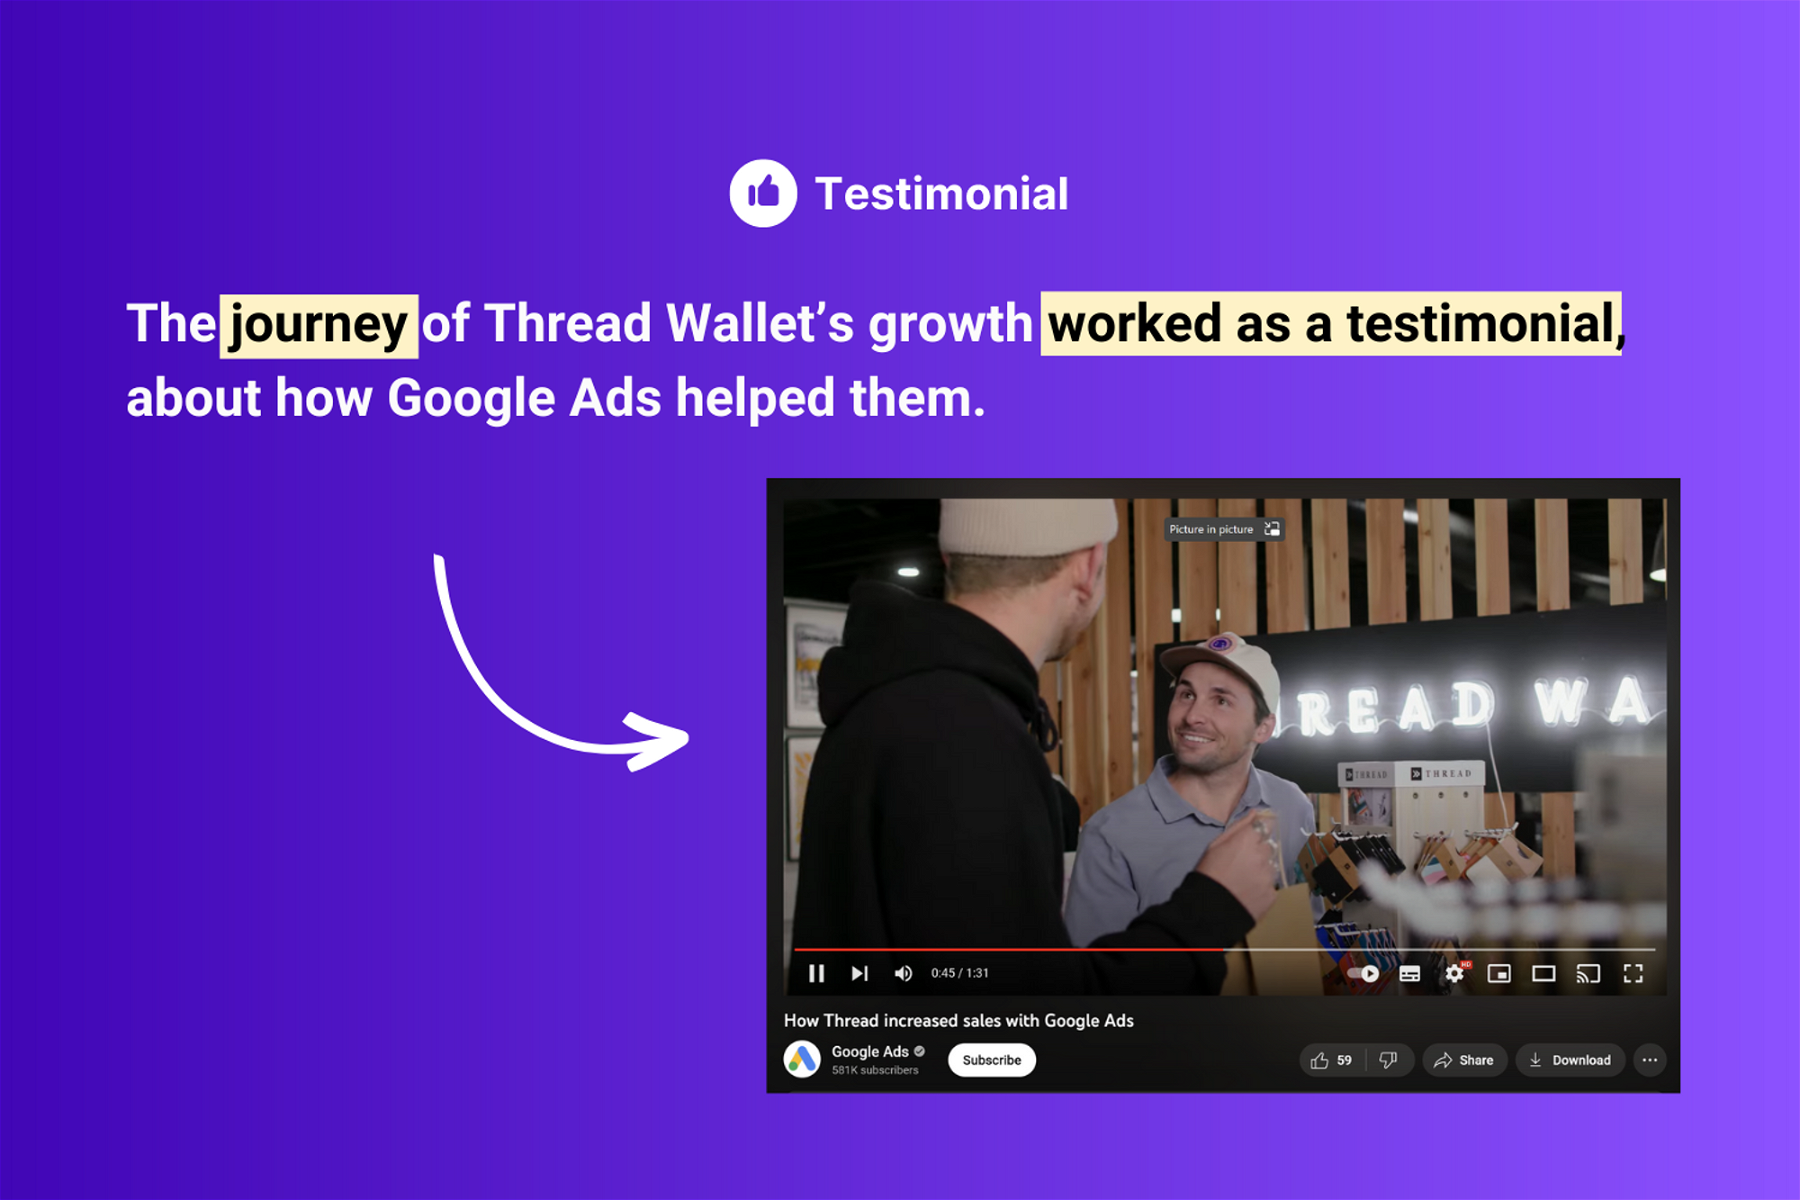 How Thread increased sales with Google Ads